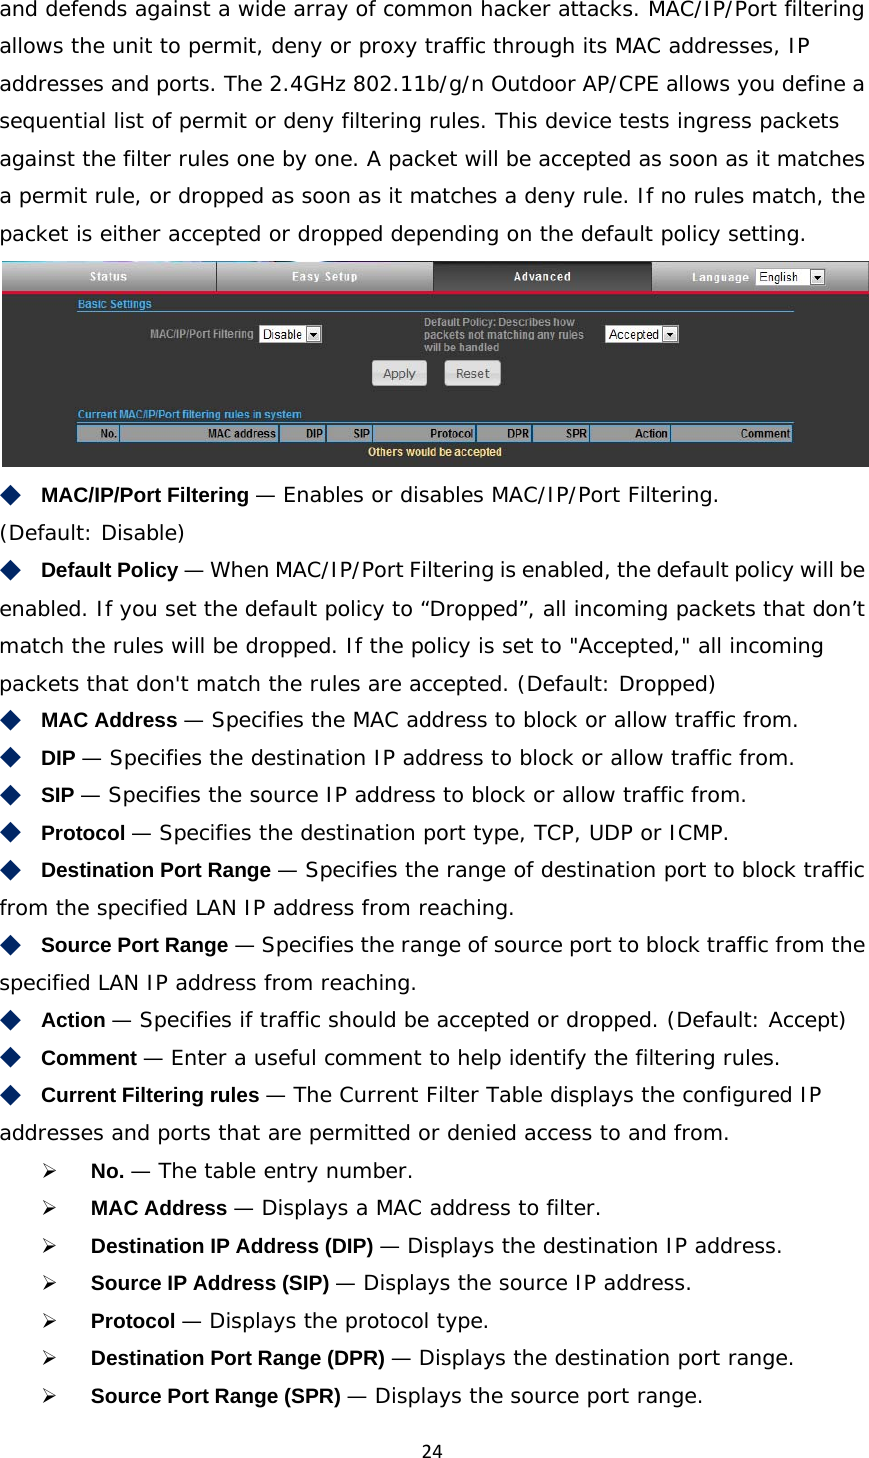 24and defends against a wide array of common hacker attacks. MAC/IP/Port filtering allows the unit to permit, deny or proxy traffic through its MAC addresses, IP addresses and ports. The 2.4GHz 802.11b/g/n Outdoor AP/CPE allows you define a sequential list of permit or deny filtering rules. This device tests ingress packets against the filter rules one by one. A packet will be accepted as soon as it matches a permit rule, or dropped as soon as it matches a deny rule. If no rules match, the packet is either accepted or dropped depending on the default policy setting.  ◆　MAC/IP/Port Filtering — Enables or disables MAC/IP/Port Filtering. (Default: Disable) ◆　Default Policy — When MAC/IP/Port Filtering is enabled, the default policy will be enabled. If you set the default policy to “Dropped”, all incoming packets that don’t match the rules will be dropped. If the policy is set to &quot;Accepted,&quot; all incoming packets that don&apos;t match the rules are accepted. (Default: Dropped) ◆　MAC Address — Specifies the MAC address to block or allow traffic from. ◆　DIP — Specifies the destination IP address to block or allow traffic from. ◆　SIP — Specifies the source IP address to block or allow traffic from. ◆　Protocol — Specifies the destination port type, TCP, UDP or ICMP. ◆　Destination Port Range — Specifies the range of destination port to block traffic from the specified LAN IP address from reaching. ◆　Source Port Range — Specifies the range of source port to block traffic from the specified LAN IP address from reaching. ◆　Action — Specifies if traffic should be accepted or dropped. (Default: Accept) ◆　Comment — Enter a useful comment to help identify the filtering rules. ◆　Current Filtering rules — The Current Filter Table displays the configured IP addresses and ports that are permitted or denied access to and from.  No. — The table entry number.  MAC Address — Displays a MAC address to filter.  Destination IP Address (DIP) — Displays the destination IP address.  Source IP Address (SIP) — Displays the source IP address.  Protocol — Displays the protocol type.  Destination Port Range (DPR) — Displays the destination port range.  Source Port Range (SPR) — Displays the source port range. 